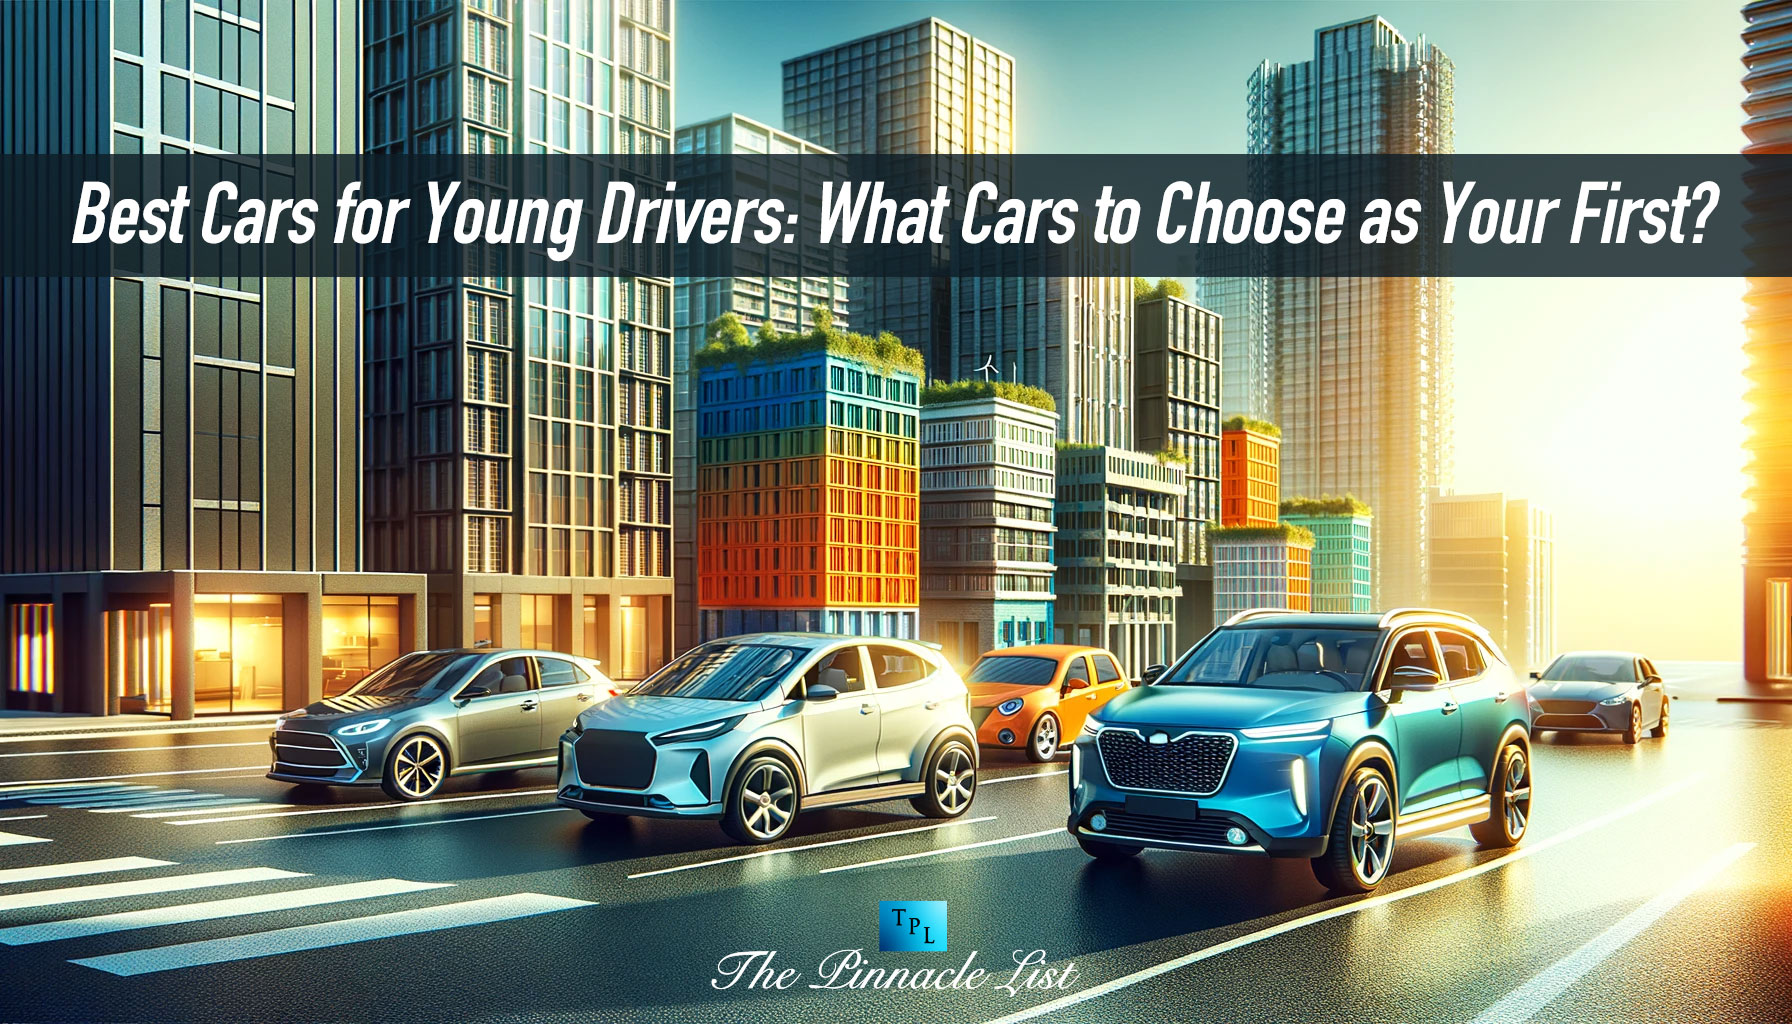 Best Cars for Young Drivers: What Cars to Choose as Your First?